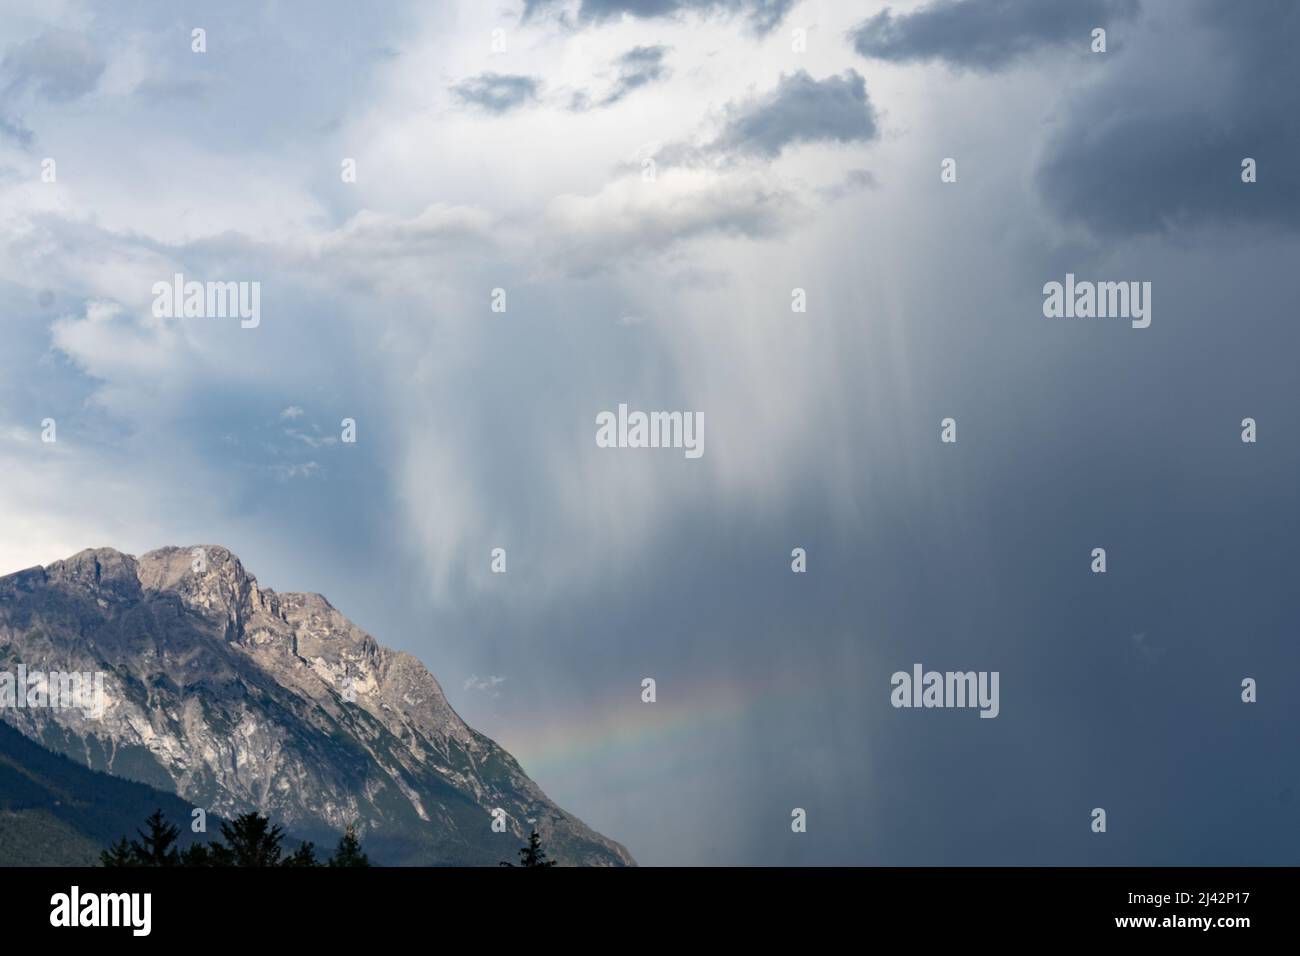 A rainbow forms over a mountain flank after a heavy thunderstorm Stock Photo